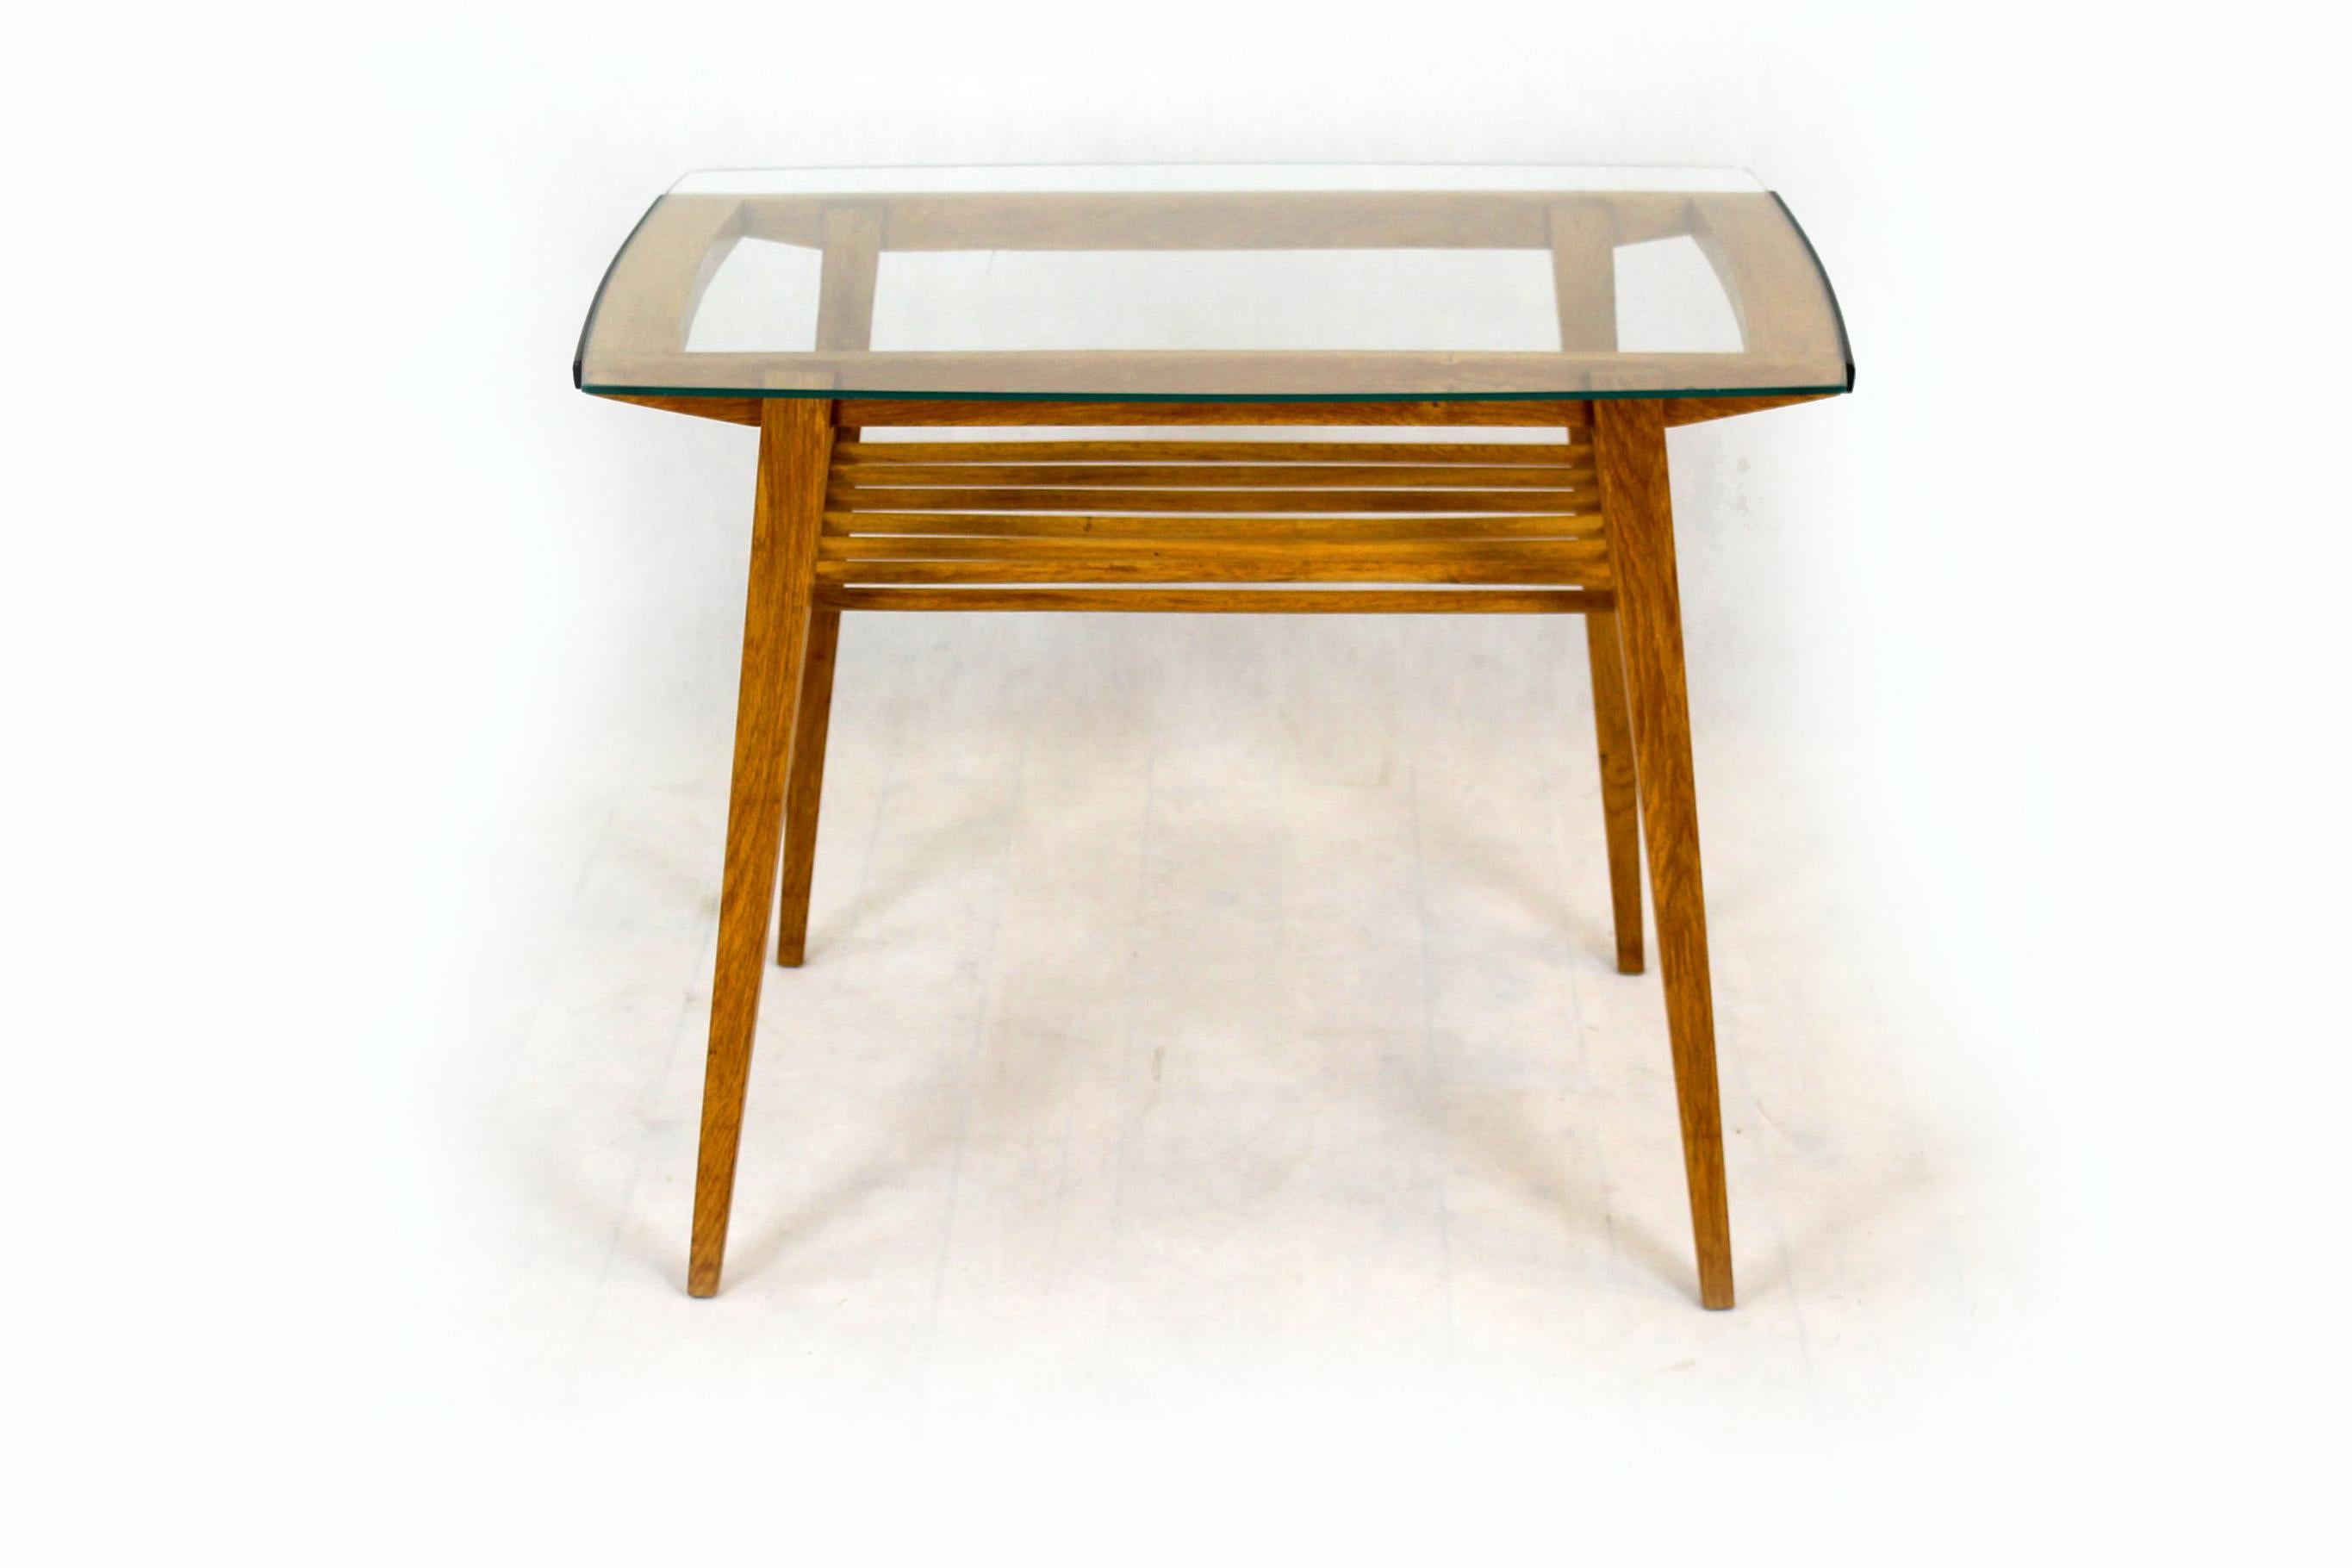 Restored Wooden Coffee Table with Glass Top from Druzstvo, 1960s For Sale 1